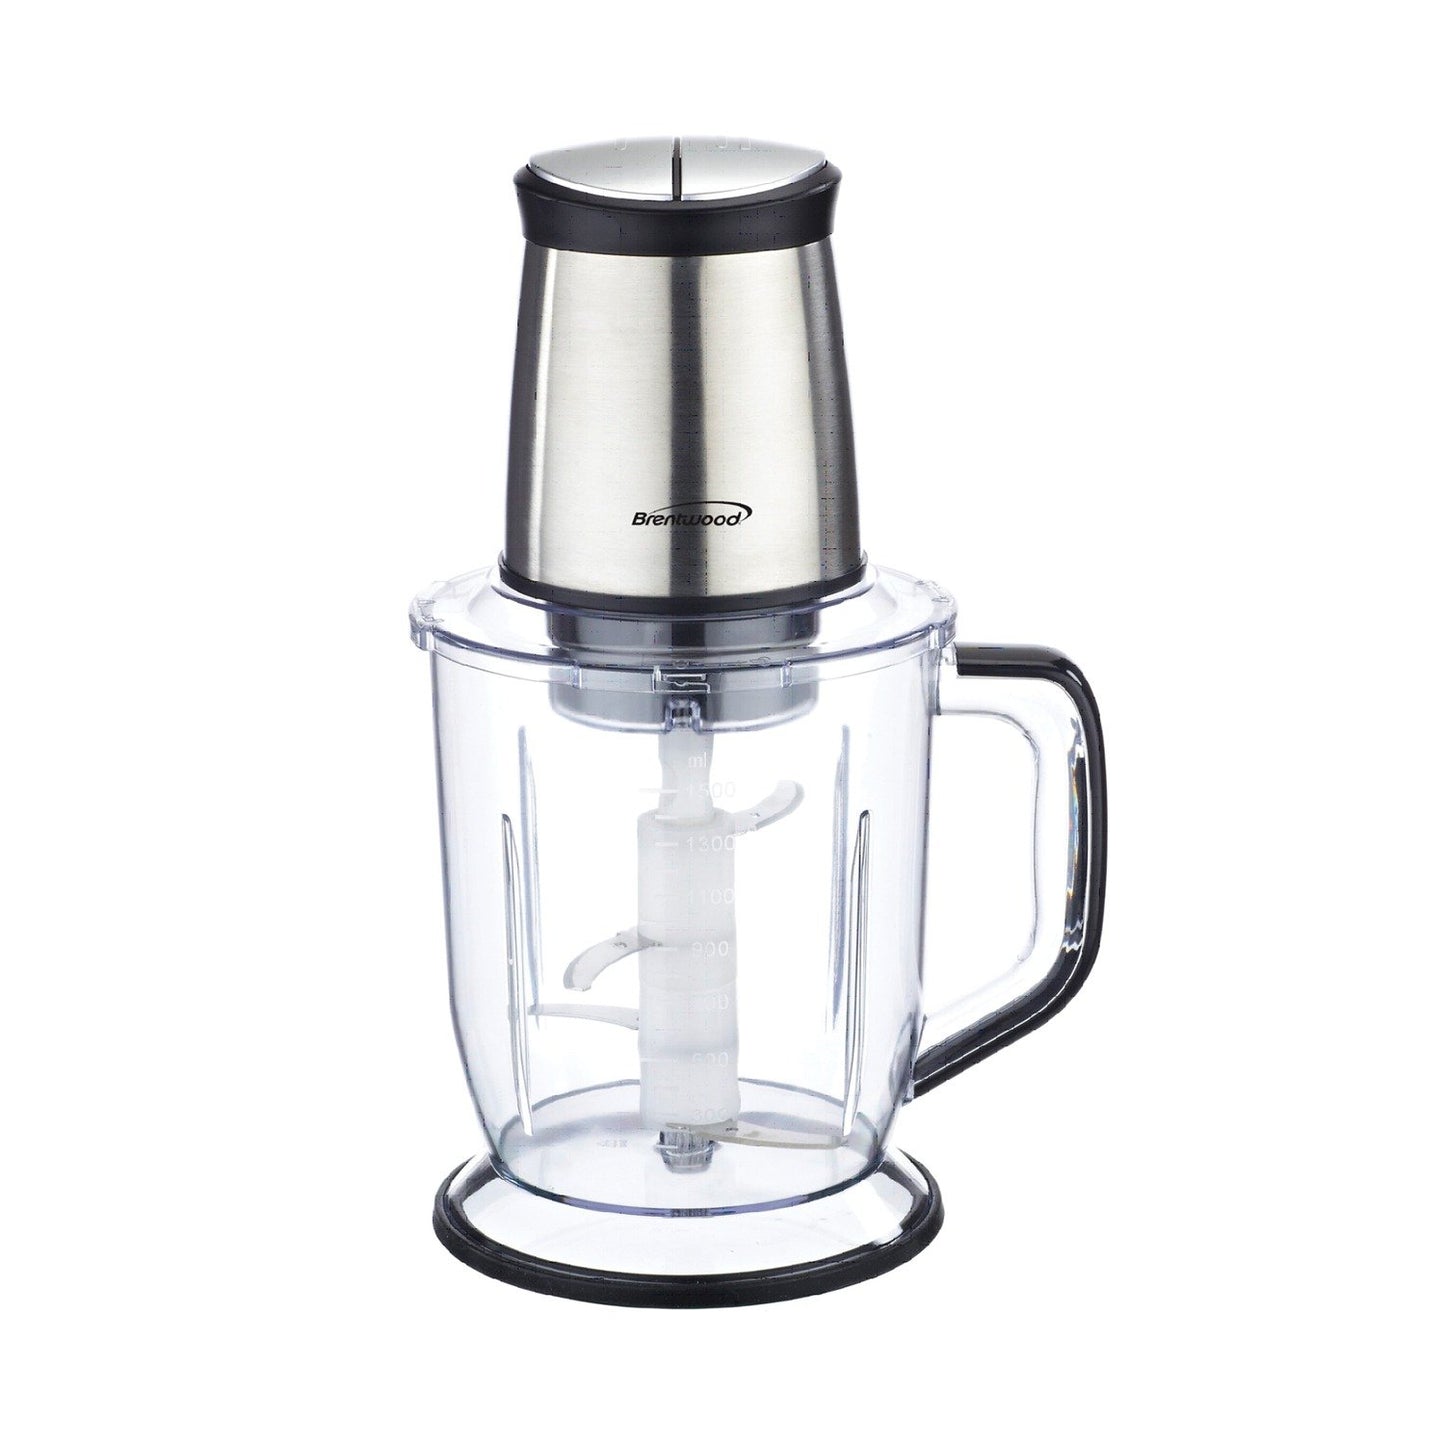 Brentwood Appl. FP-544S 300W 4-Blade 6.5-Cup Food Processor